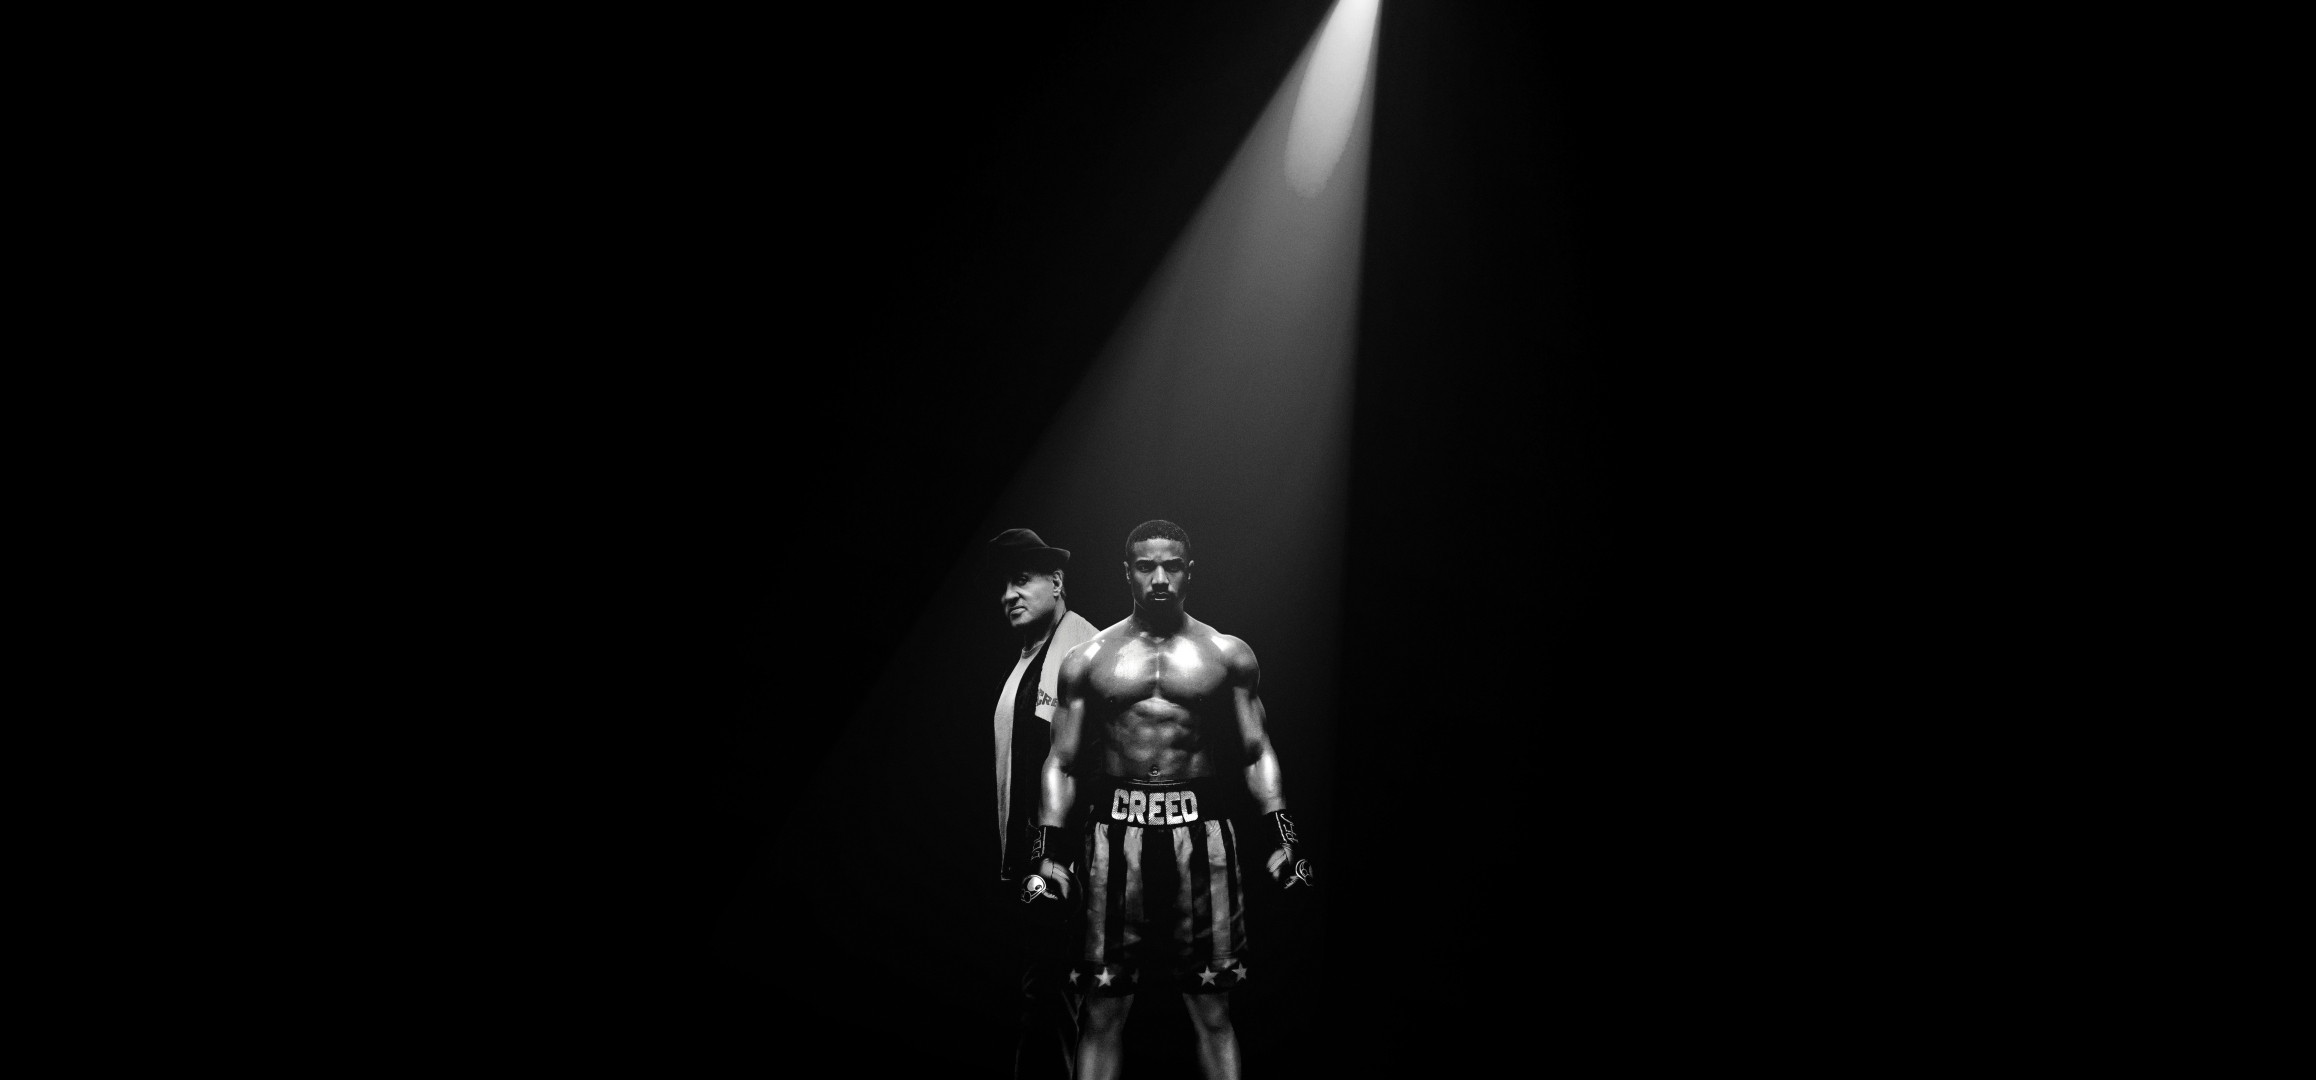 2316x1080 Resolution Sylvester Stallone and Michael Jordan in Creed 2 ...